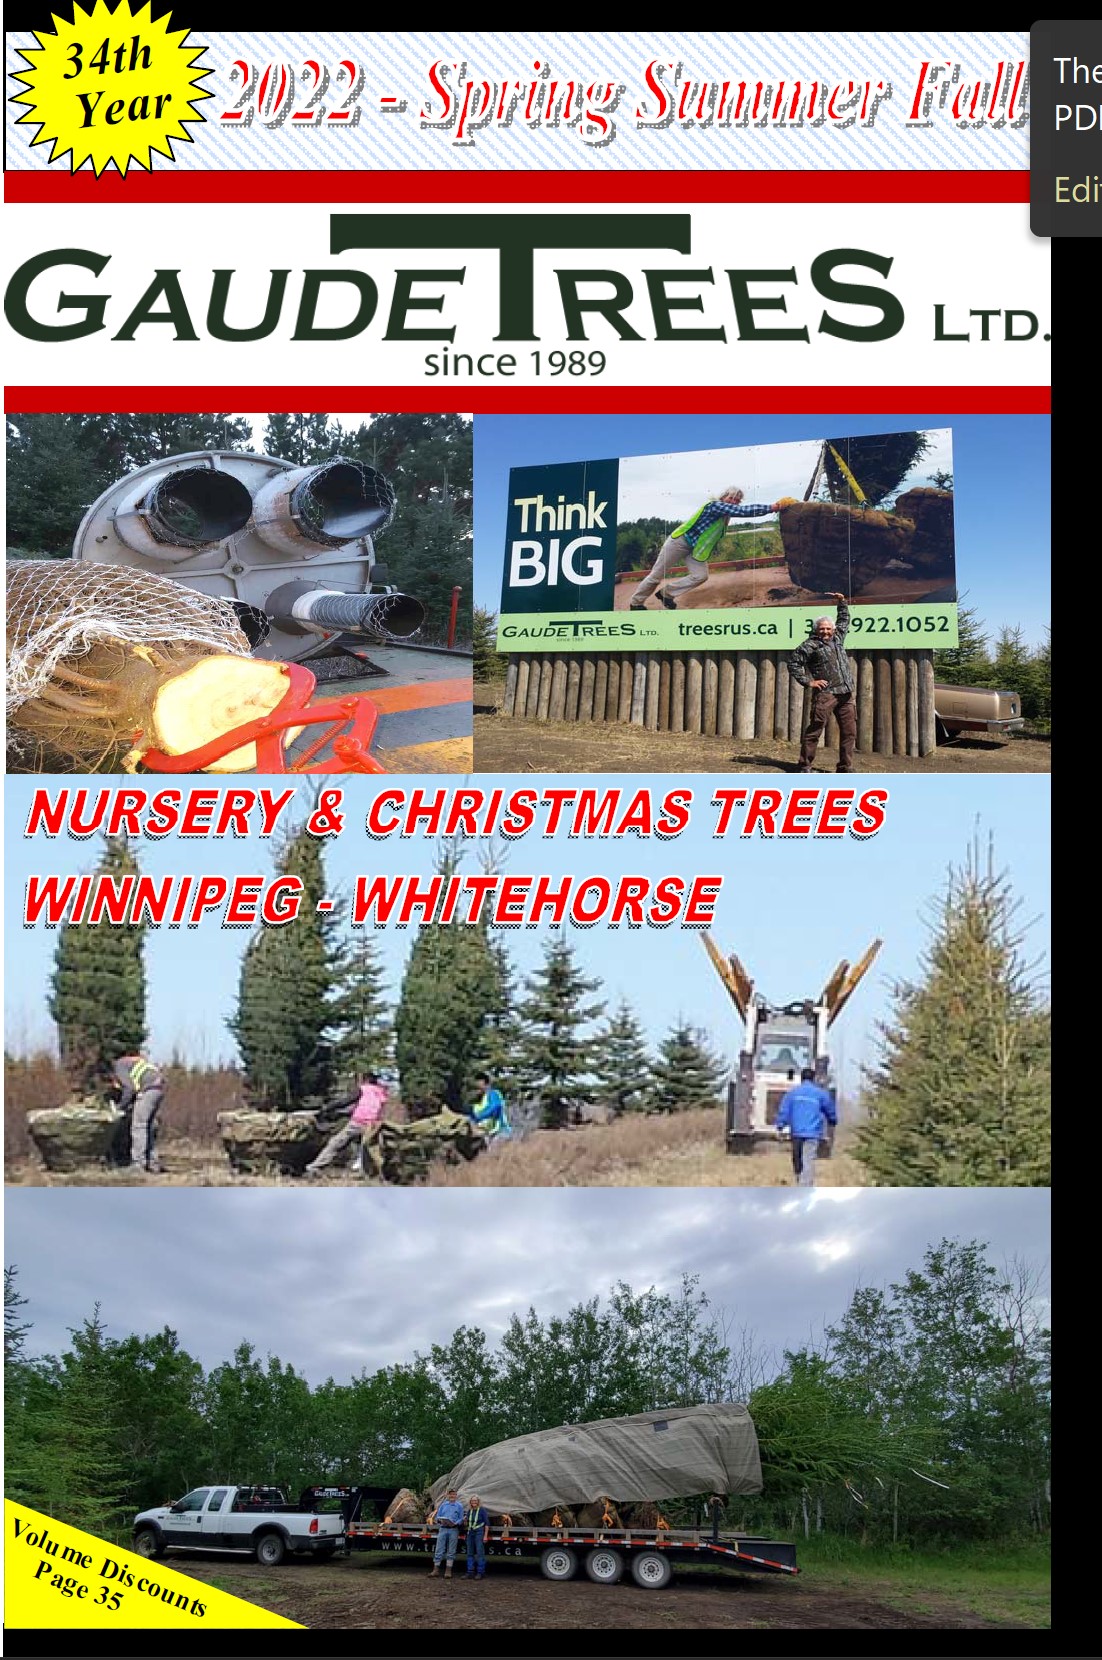 Gaudet Trees catalogue for spring, summer and fall 2022